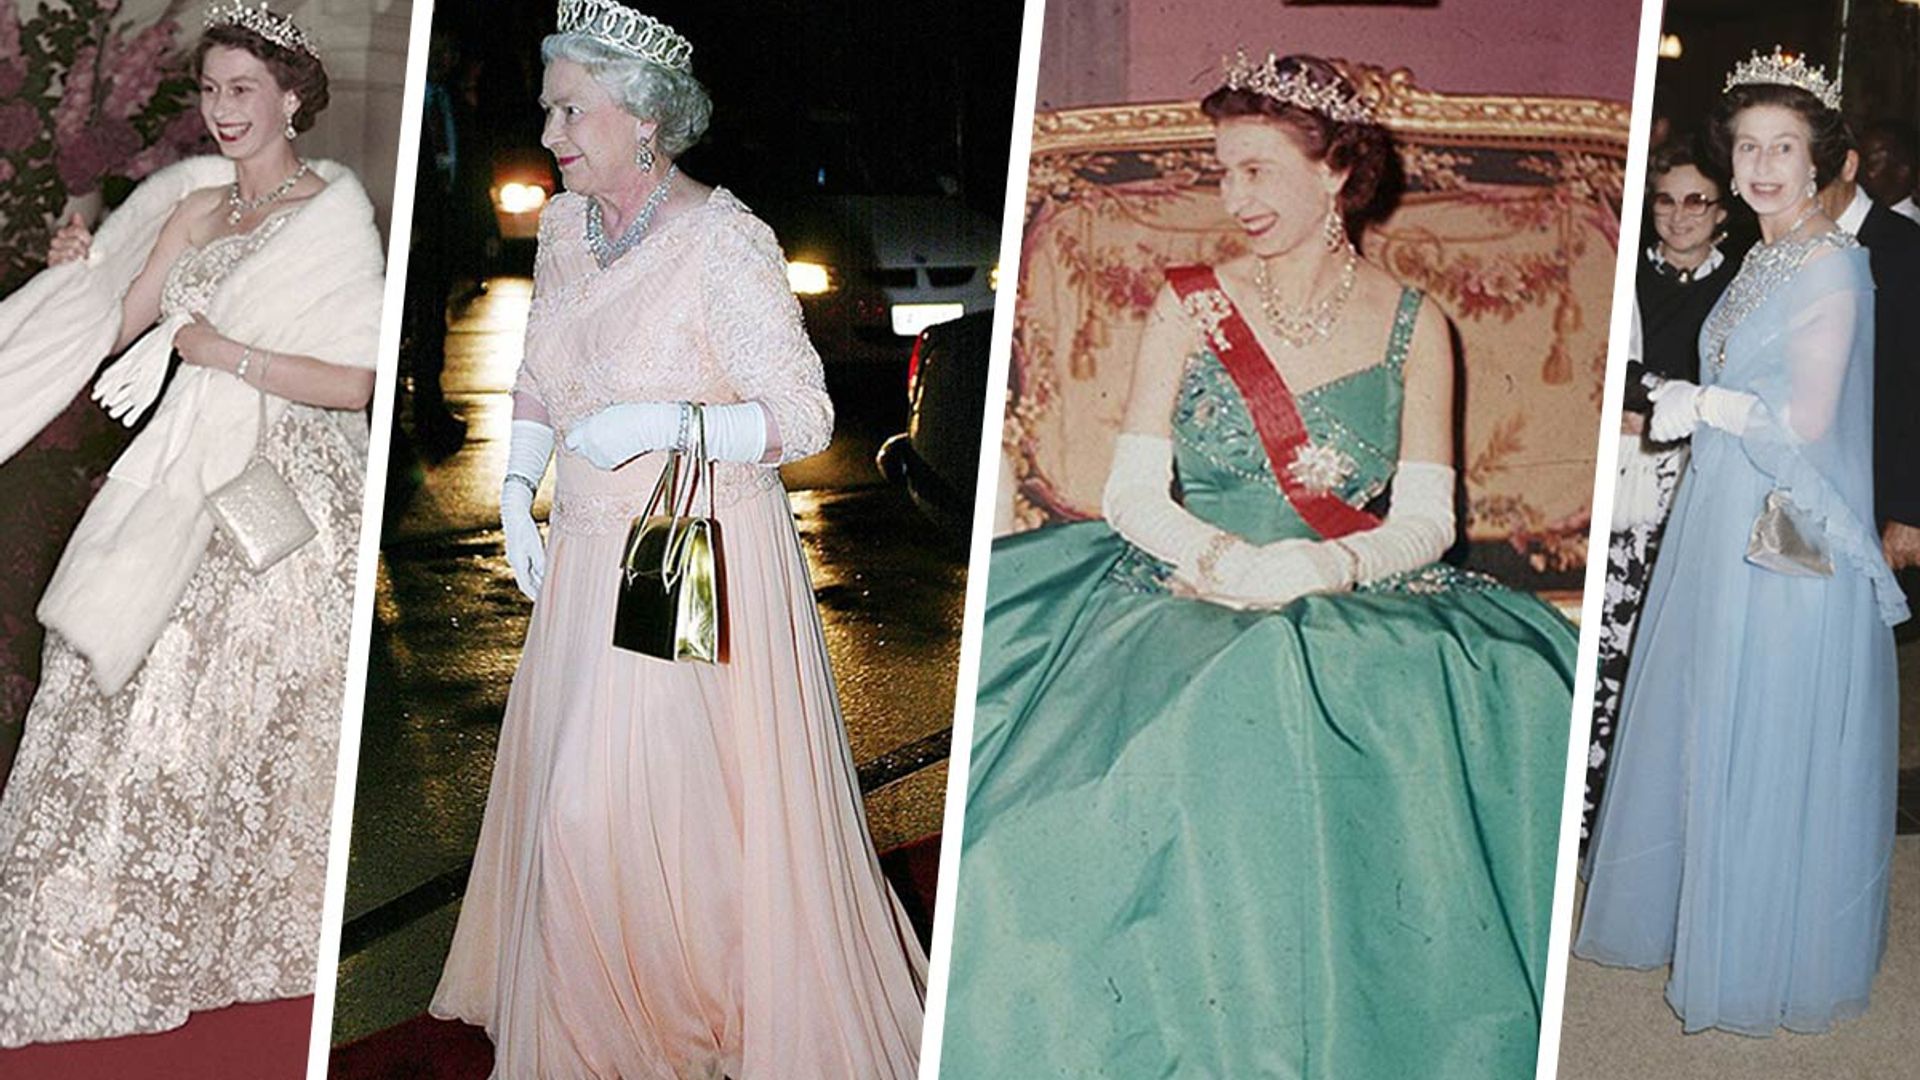 Royal ballgowns: The Queen's most beautiful dresses over the years